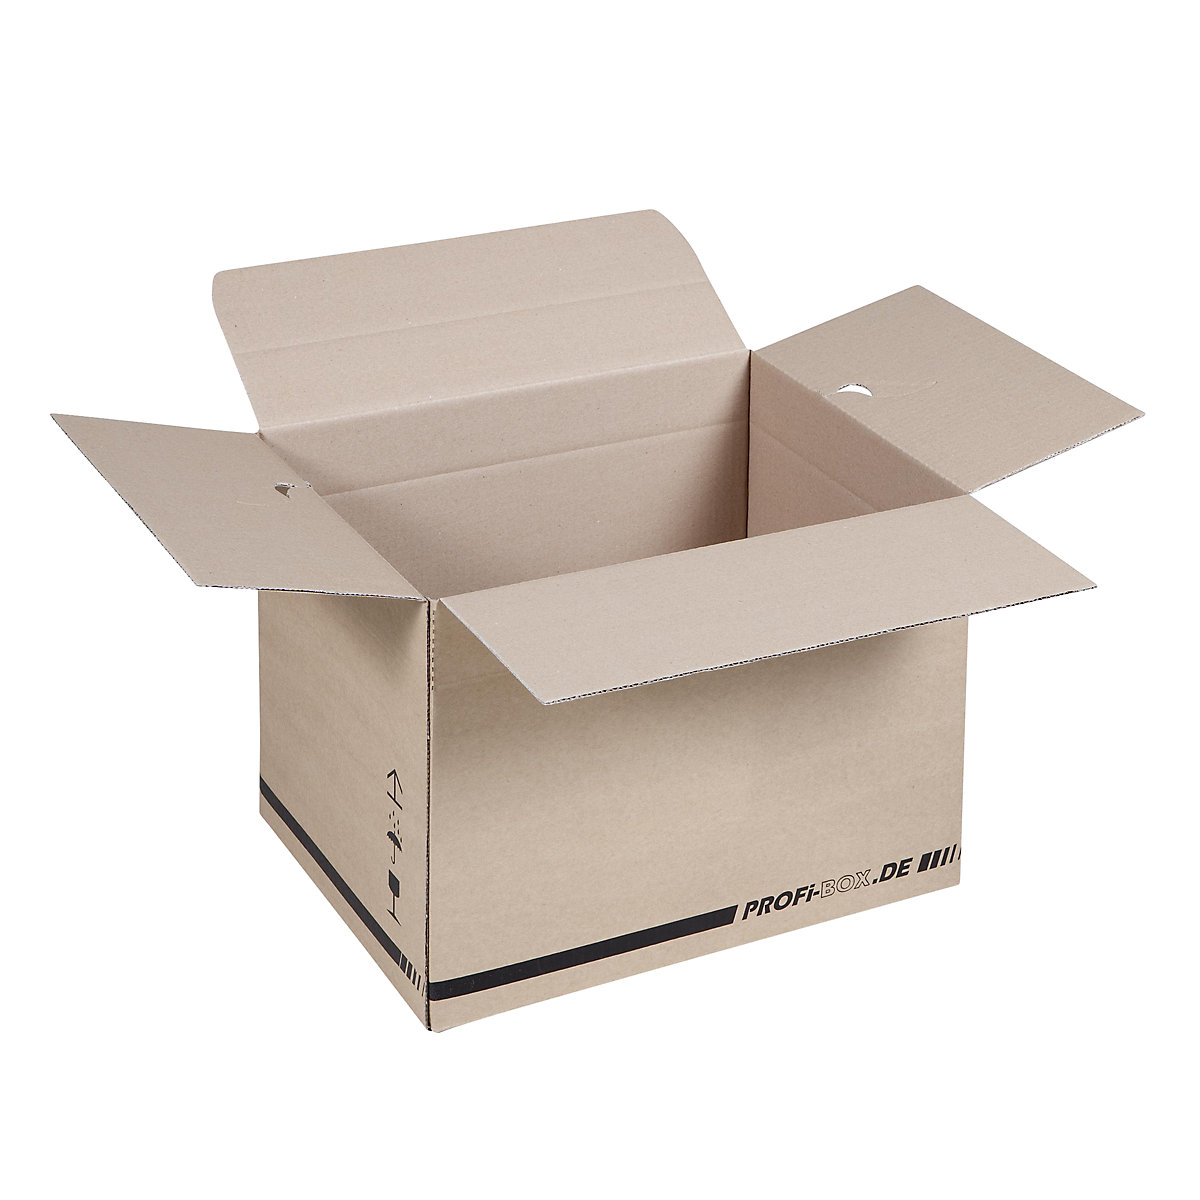 Professional boxes, made of single fluted cardboard, FEFCO 0701, internal dimensions 384 x 284 x 284 mm, pack of 50-7